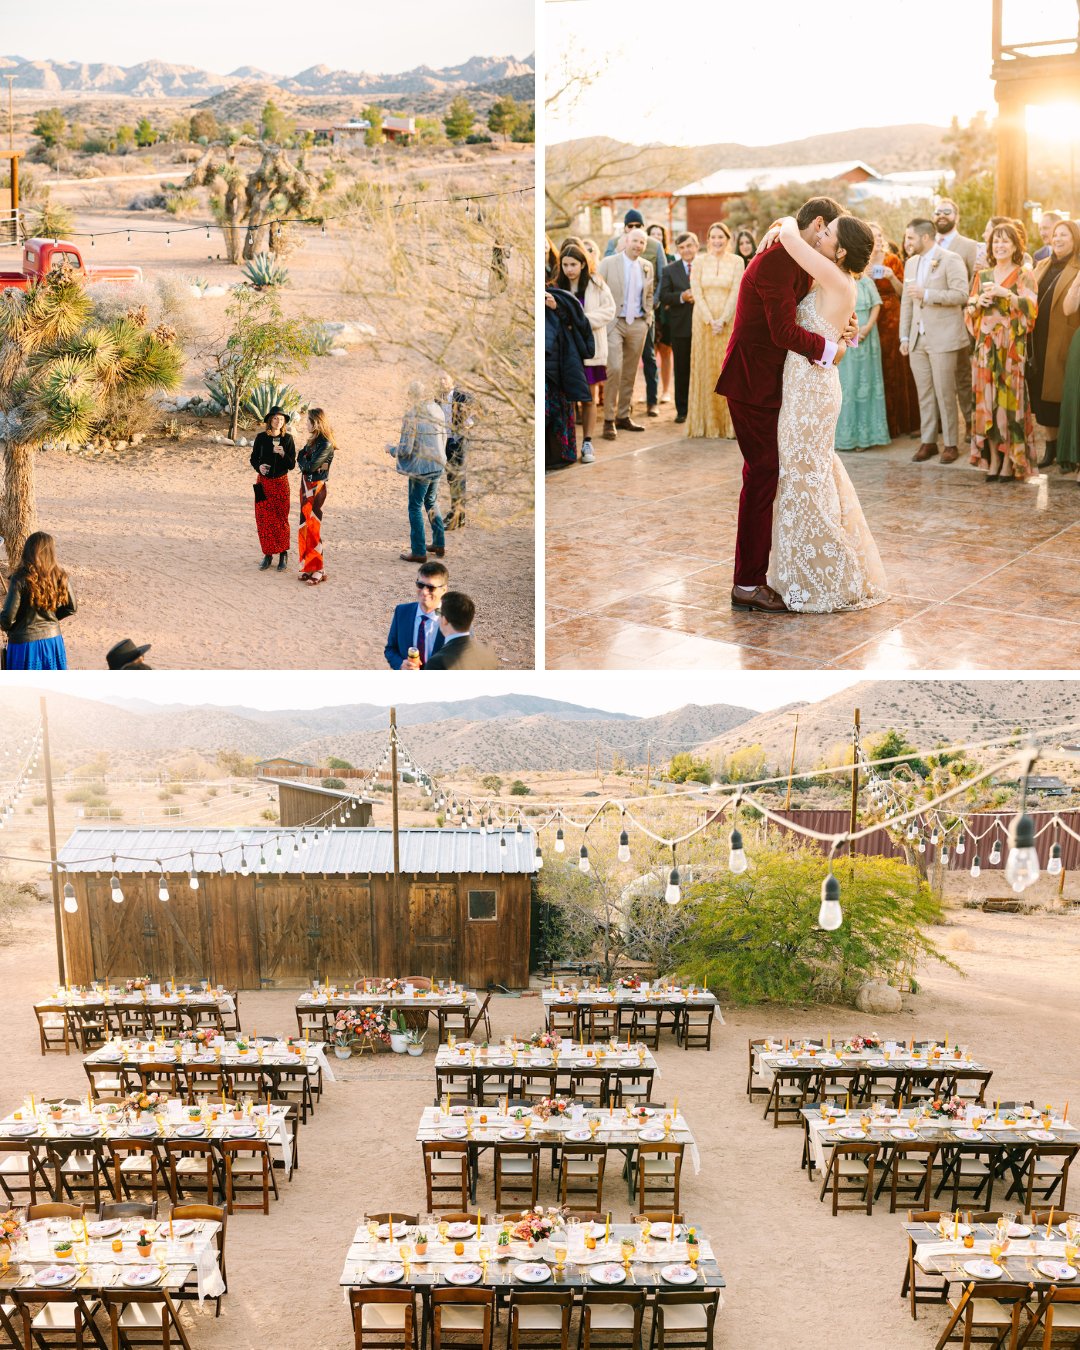 aerial photos of the wedding reception and the couple's first dance just before sunset